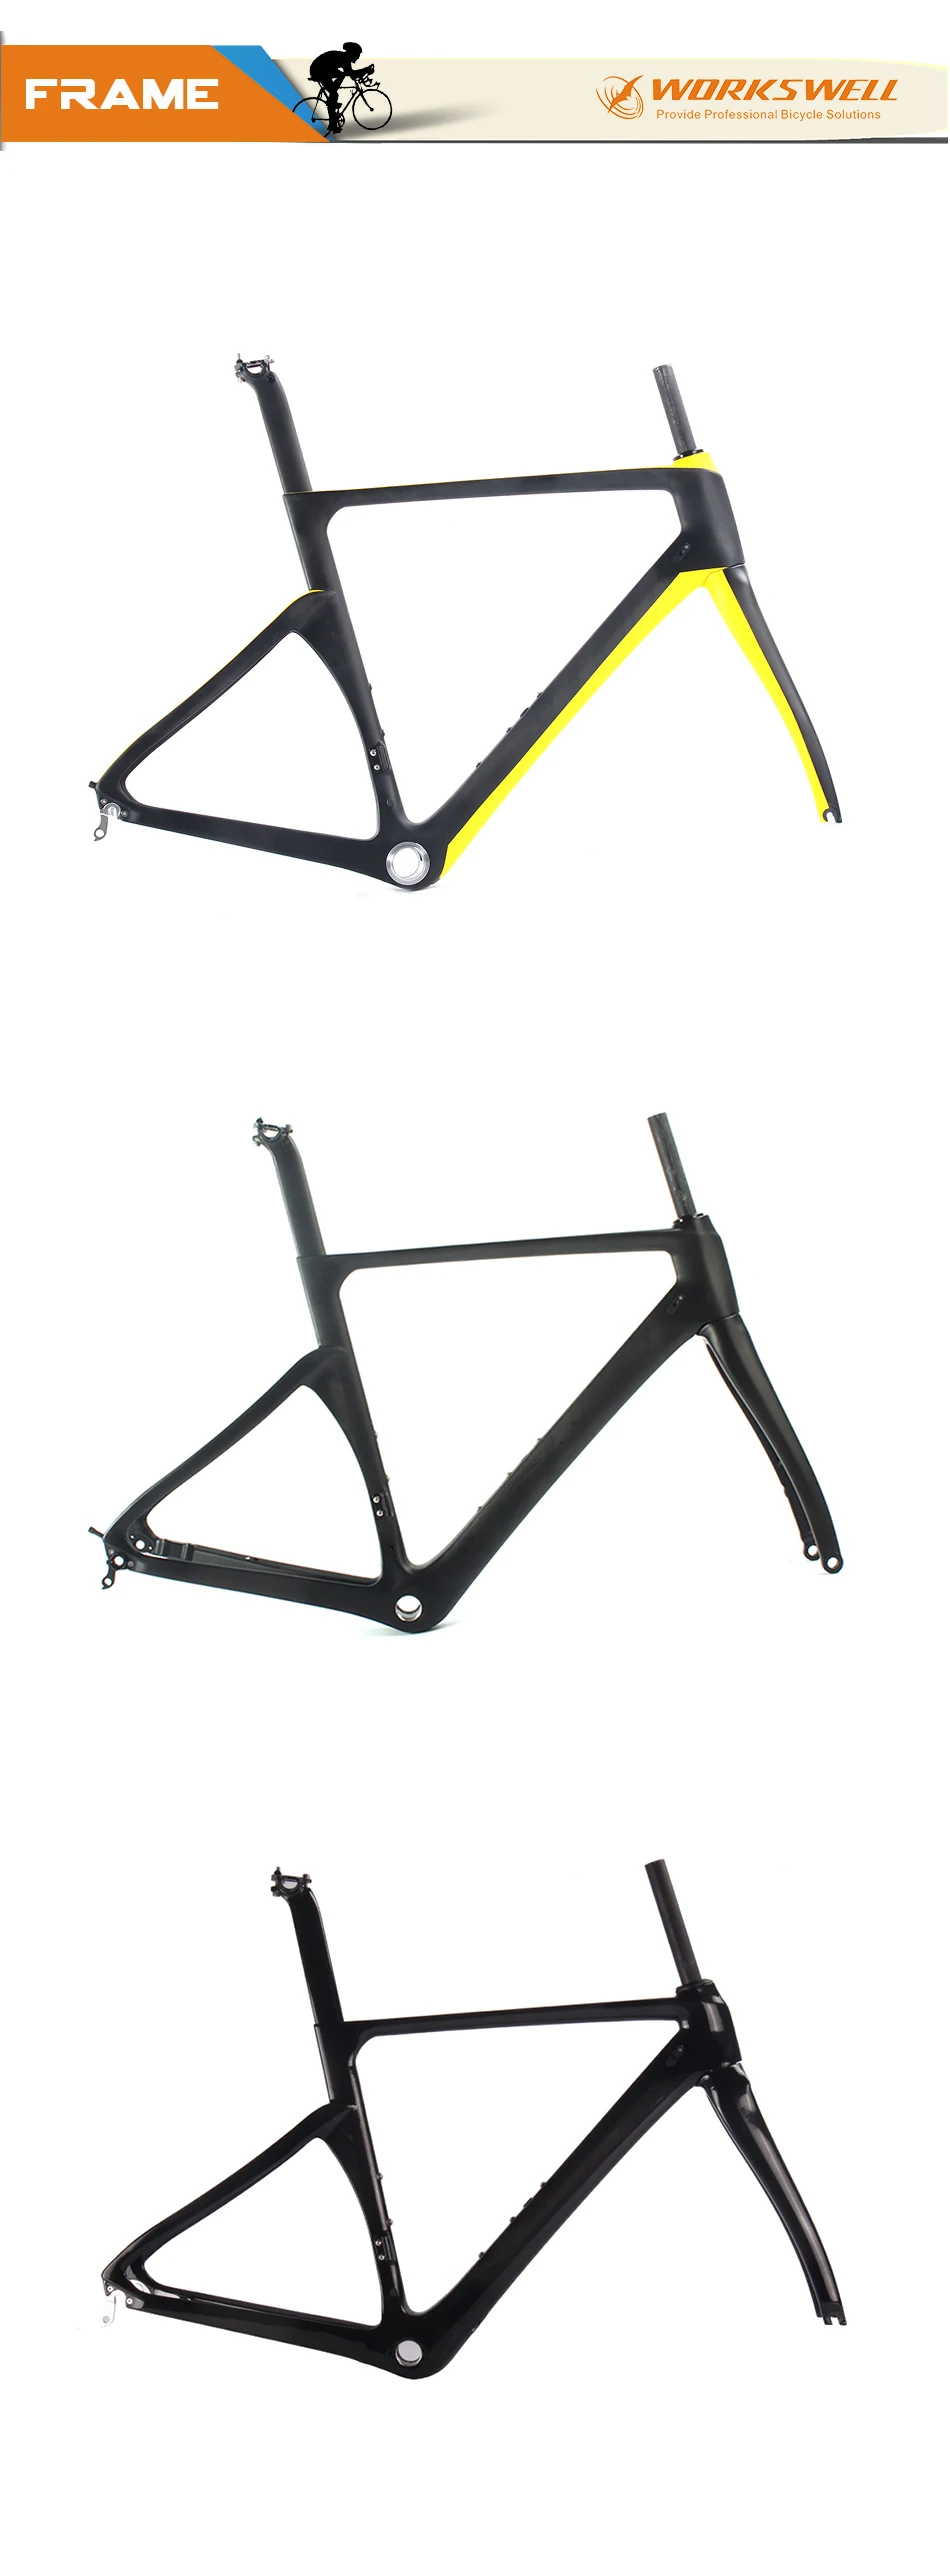 Cheap WORKSWELL  Frame Carbon Road 2017 Bicycle Quadro de Bicicleta Chinese Road racing frame thru axle 4